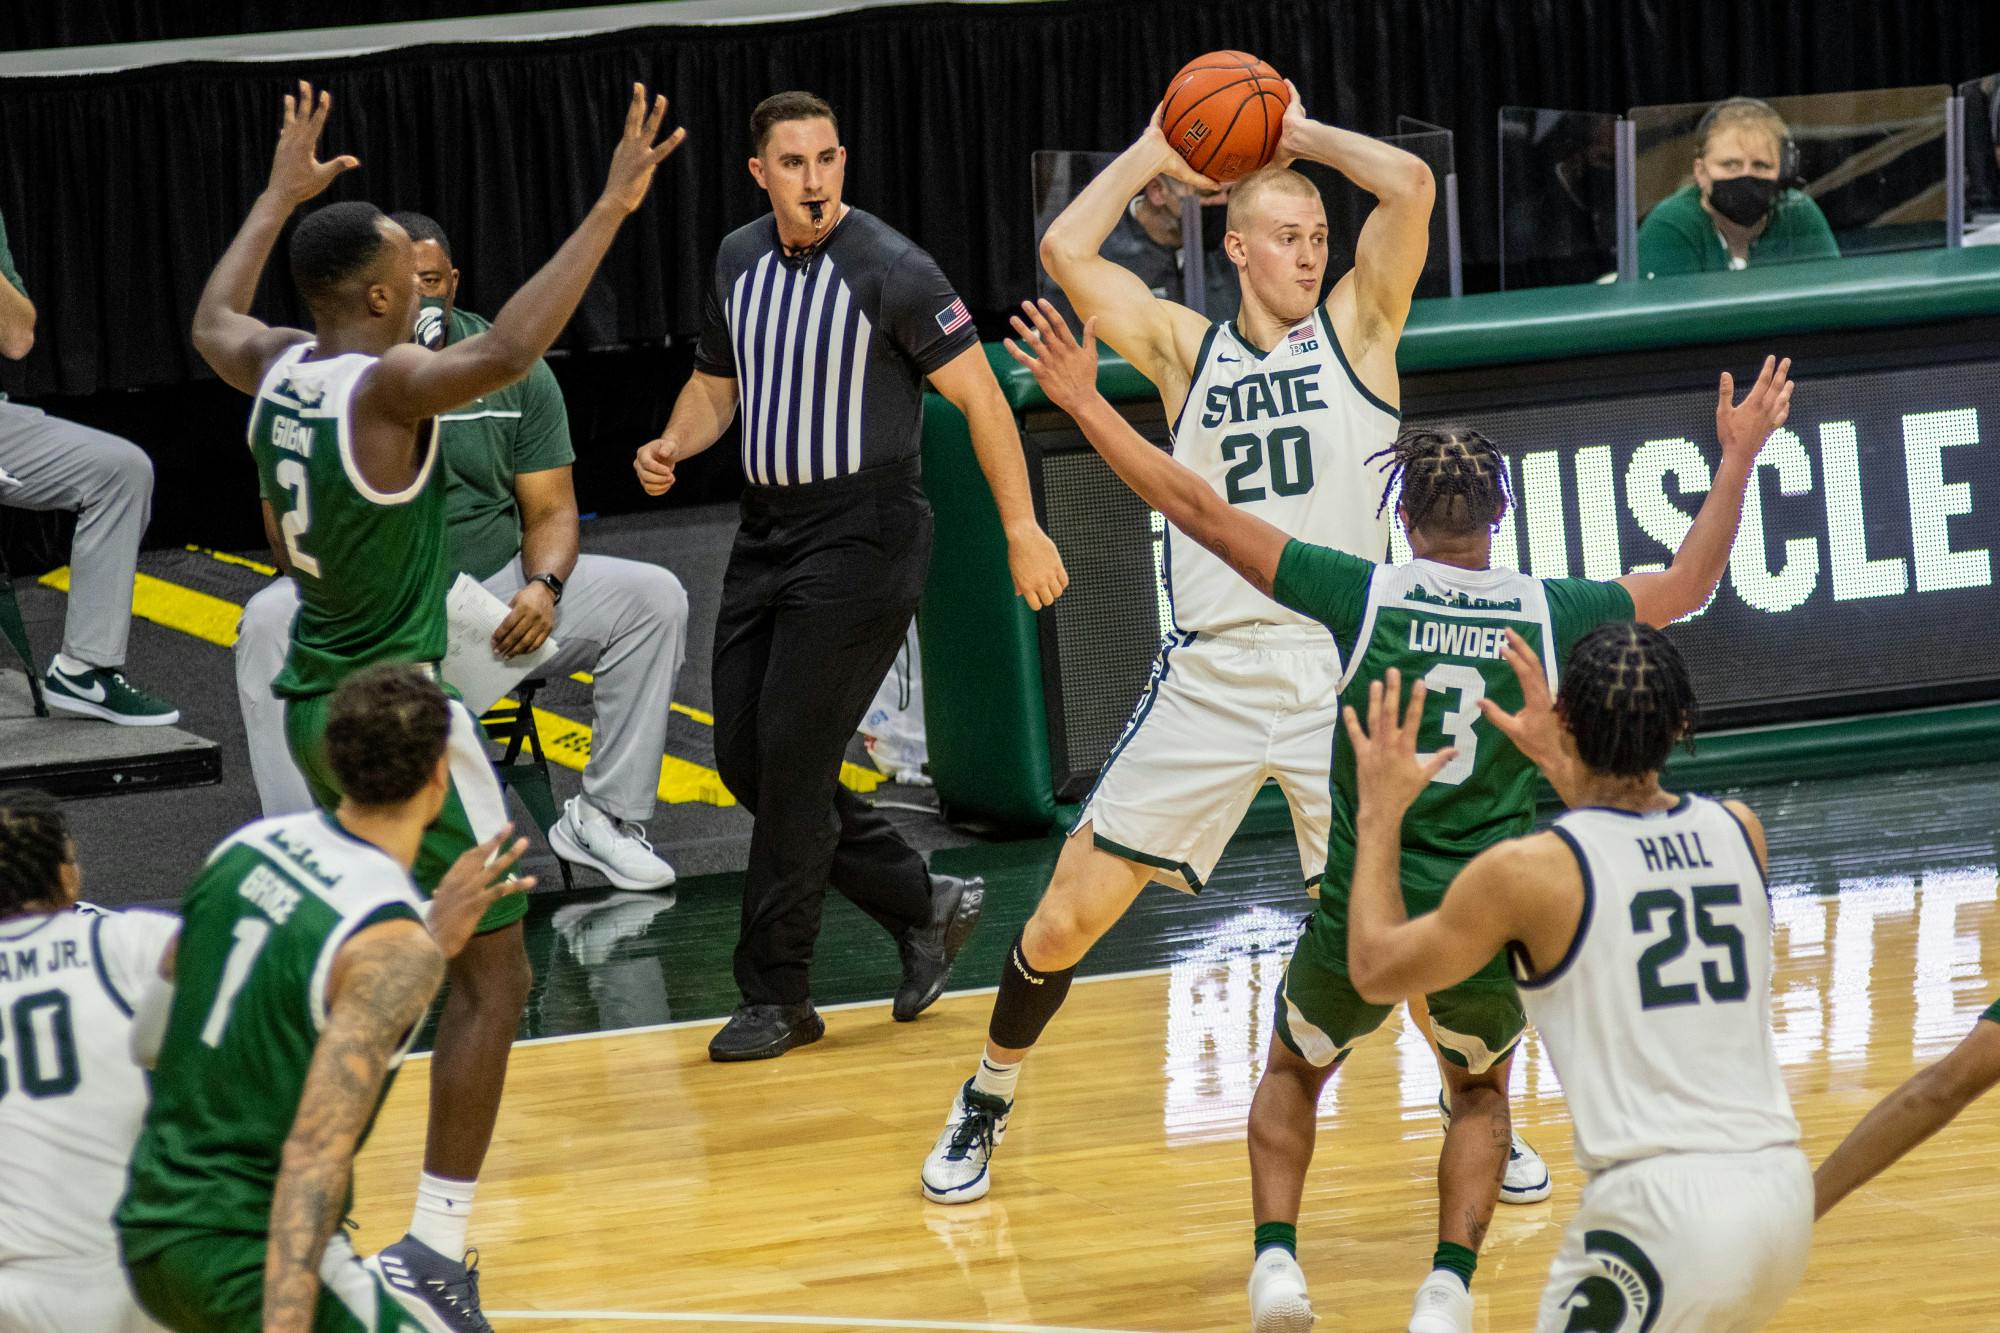 Red-shirt junior forward Joey Hauser(20) tries to pass the ball during the game against Eastern Michigan on Nov. 25, 2020 at the Breslin Center. The Spartans defeated the Eagles, 83-67.